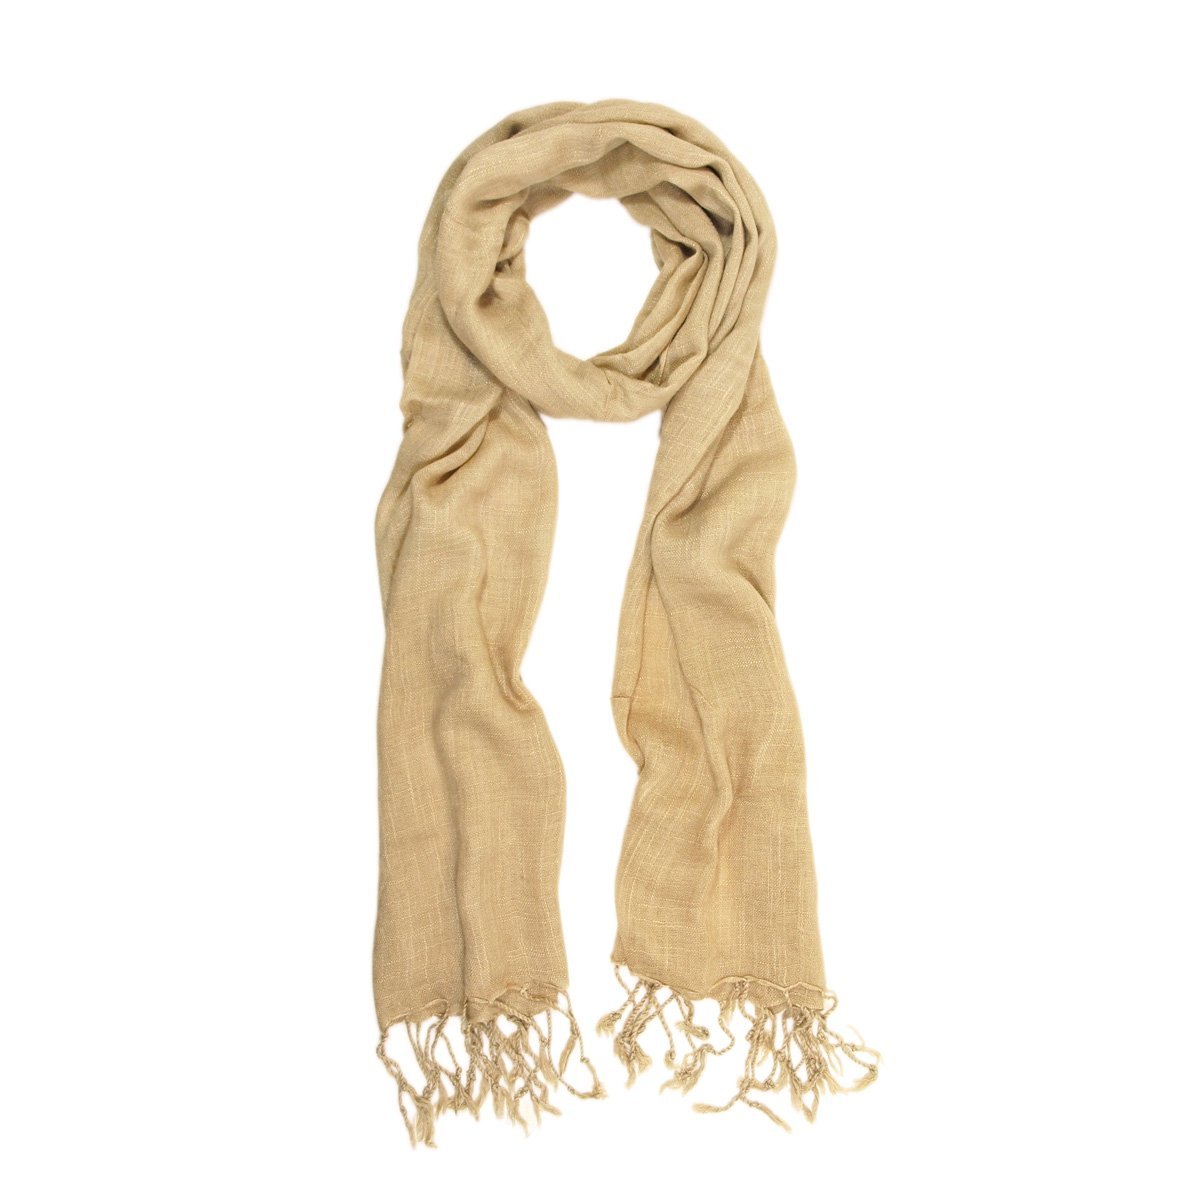 Yinglite Elegant Solid Color Viscose Fringe Scarf   Different Colors Available